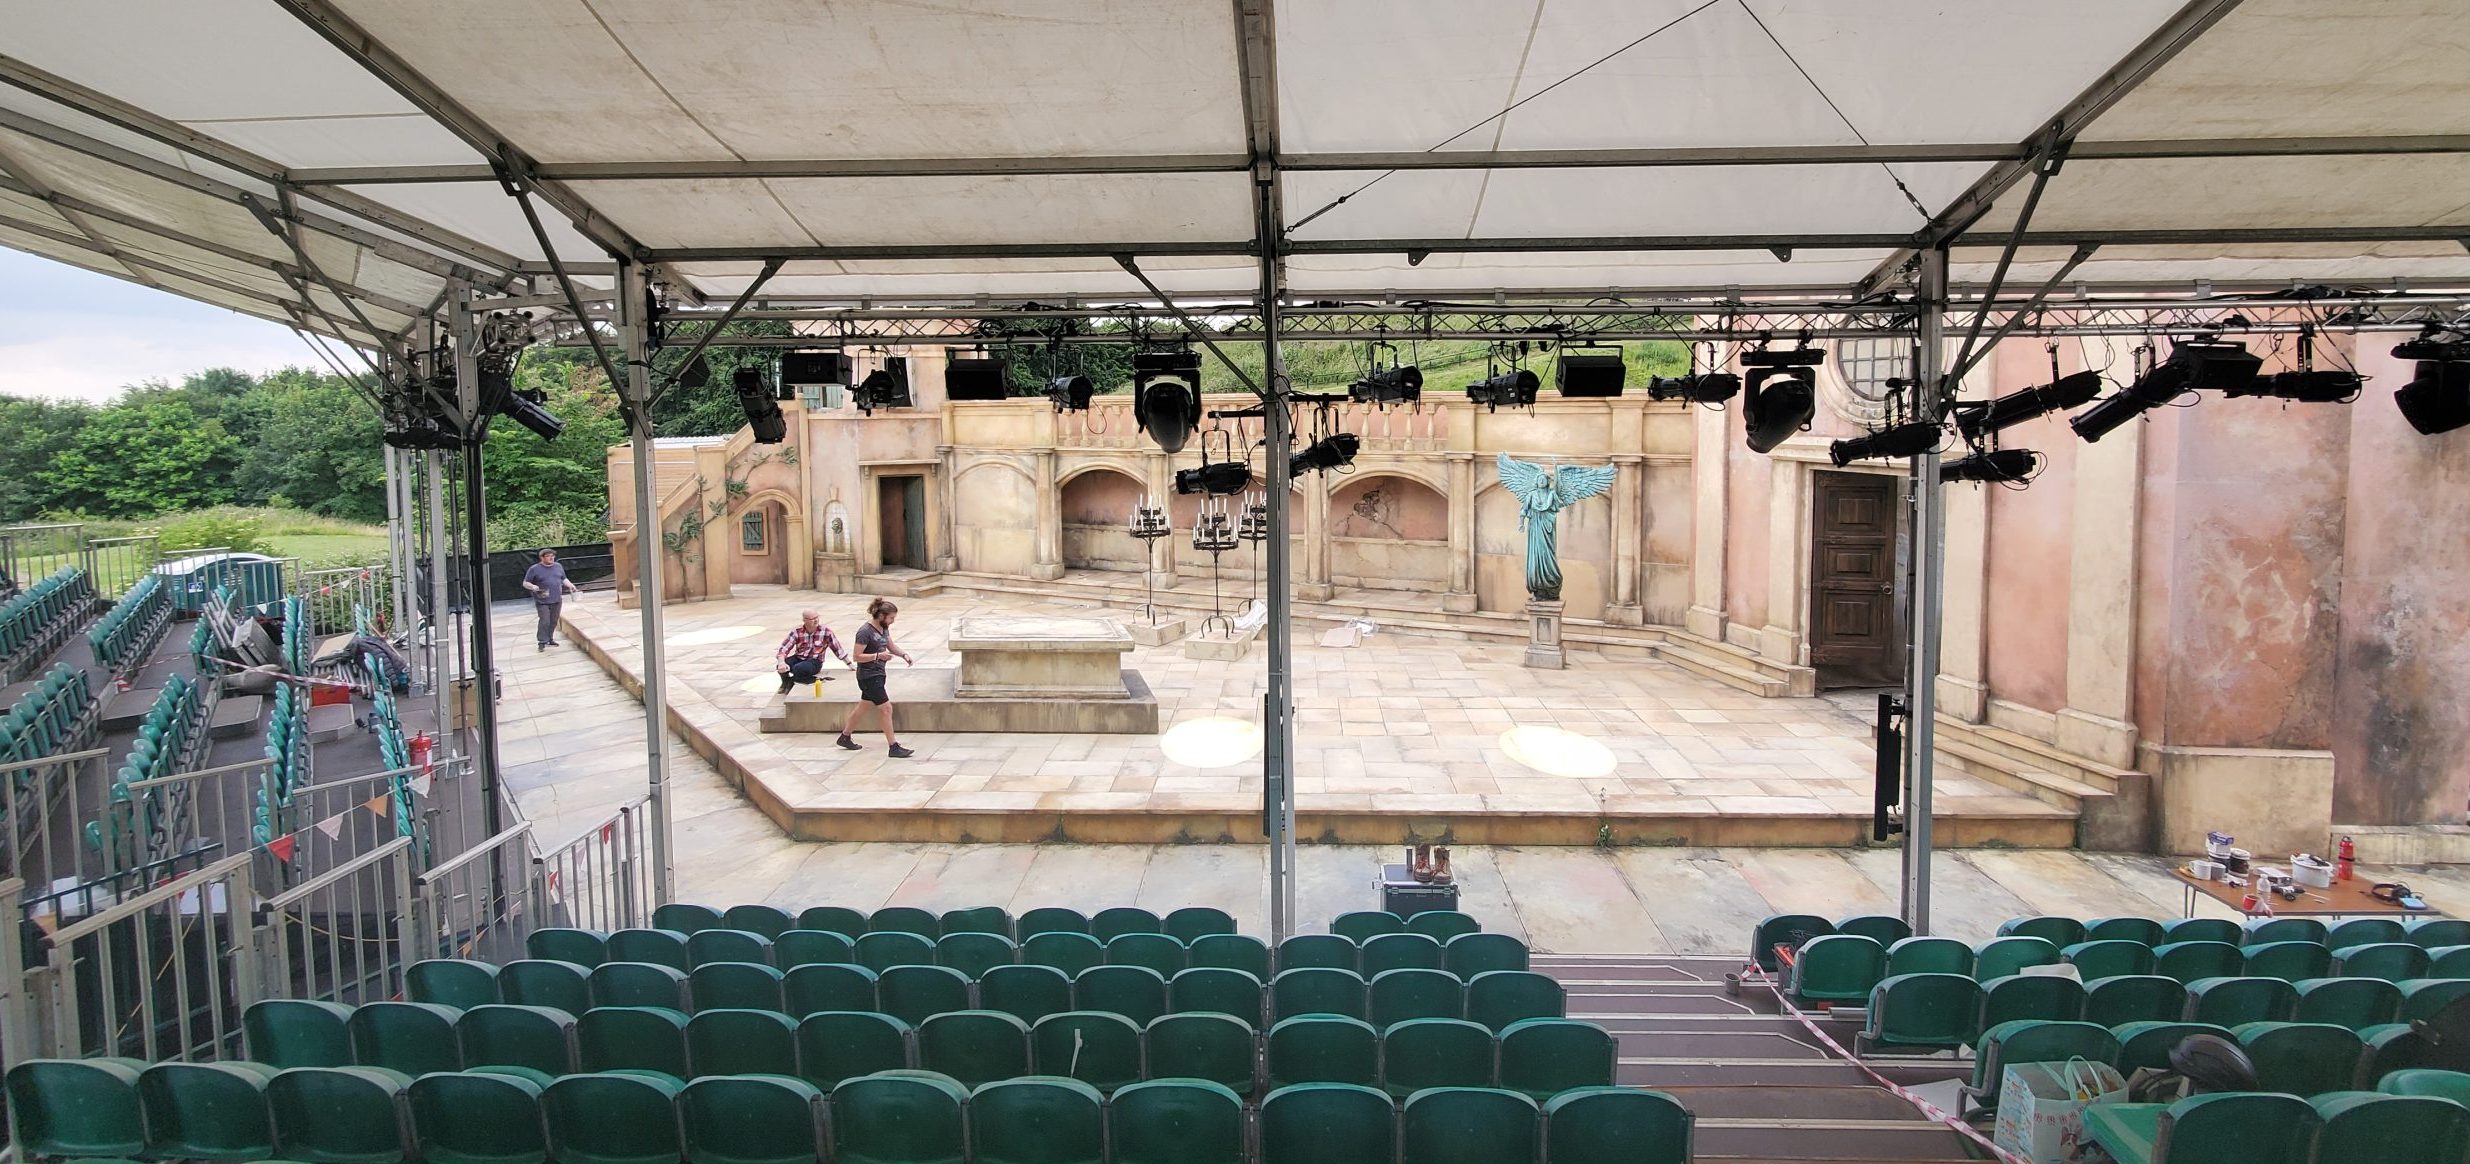 Stafford Romeo Juliet Audience Stands